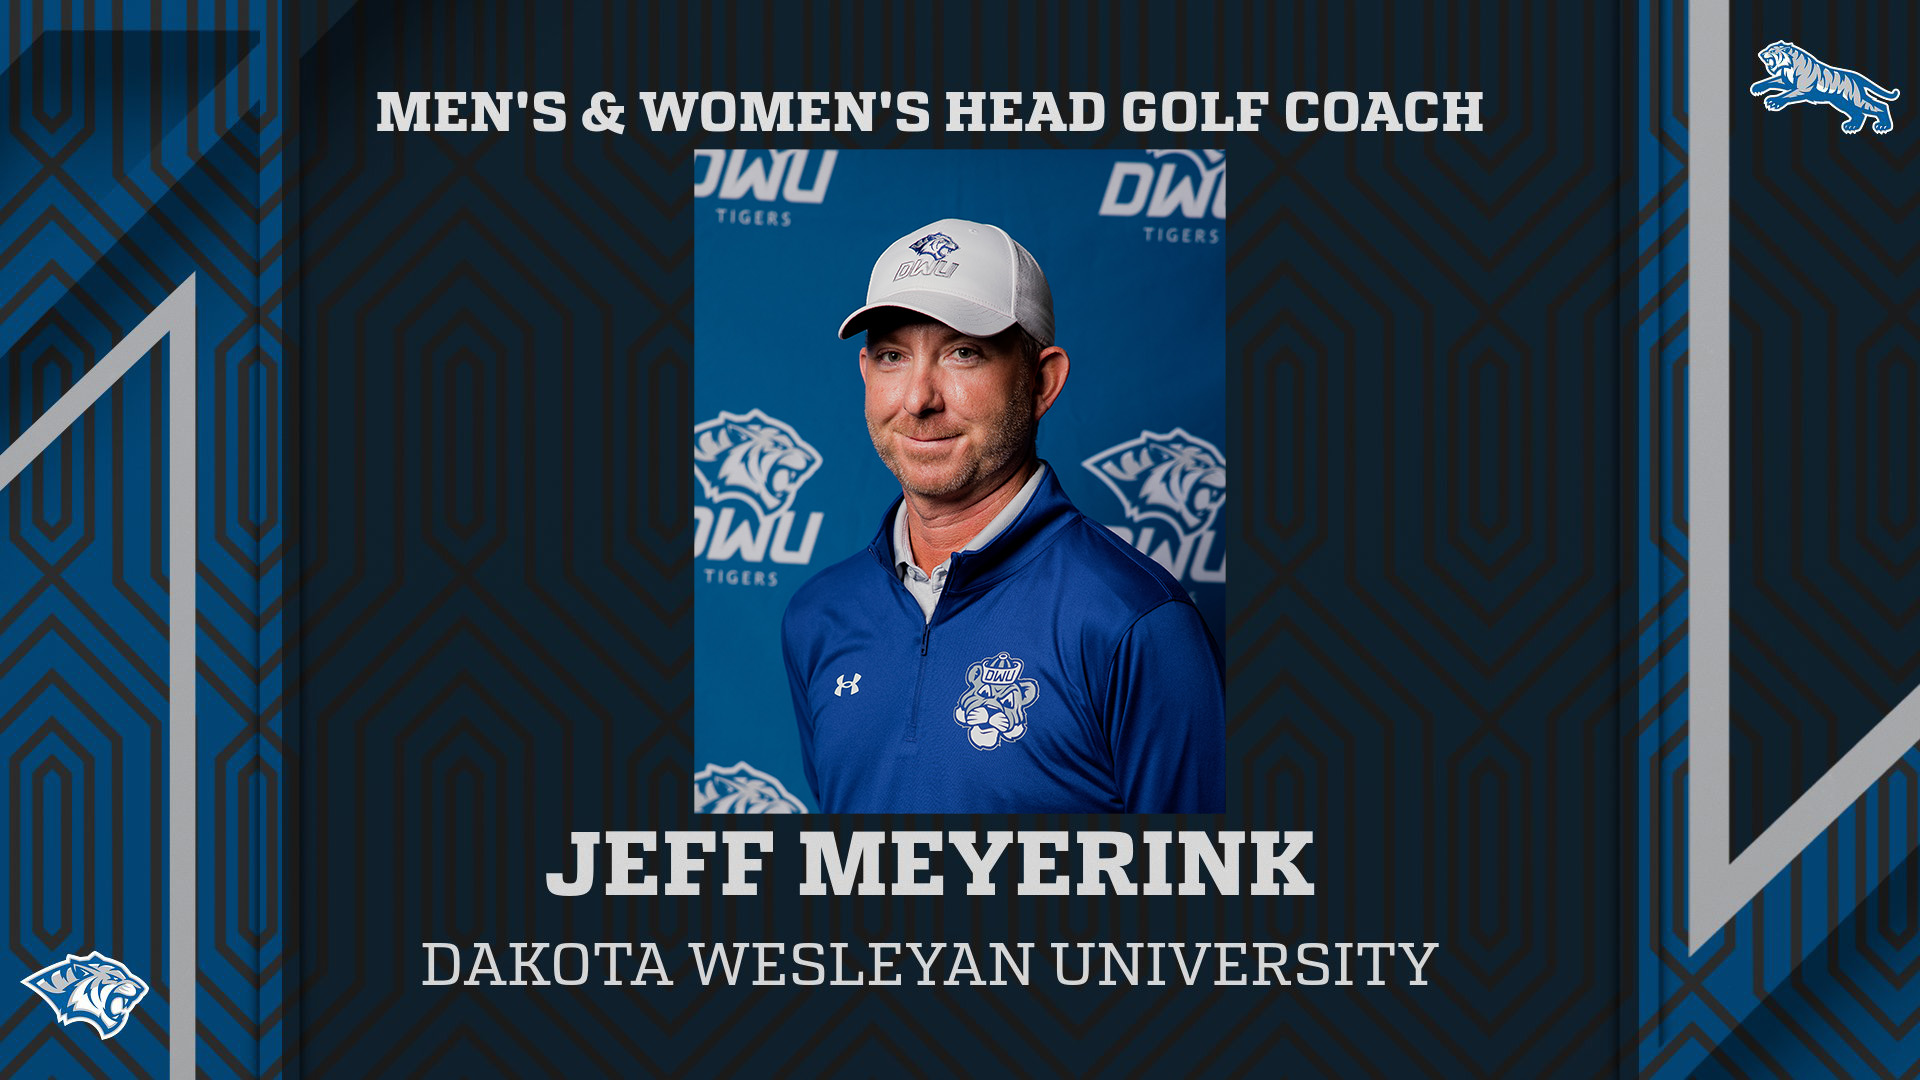 JEFF MEYERINK APPOINTED TO HEAD GOLF COACH